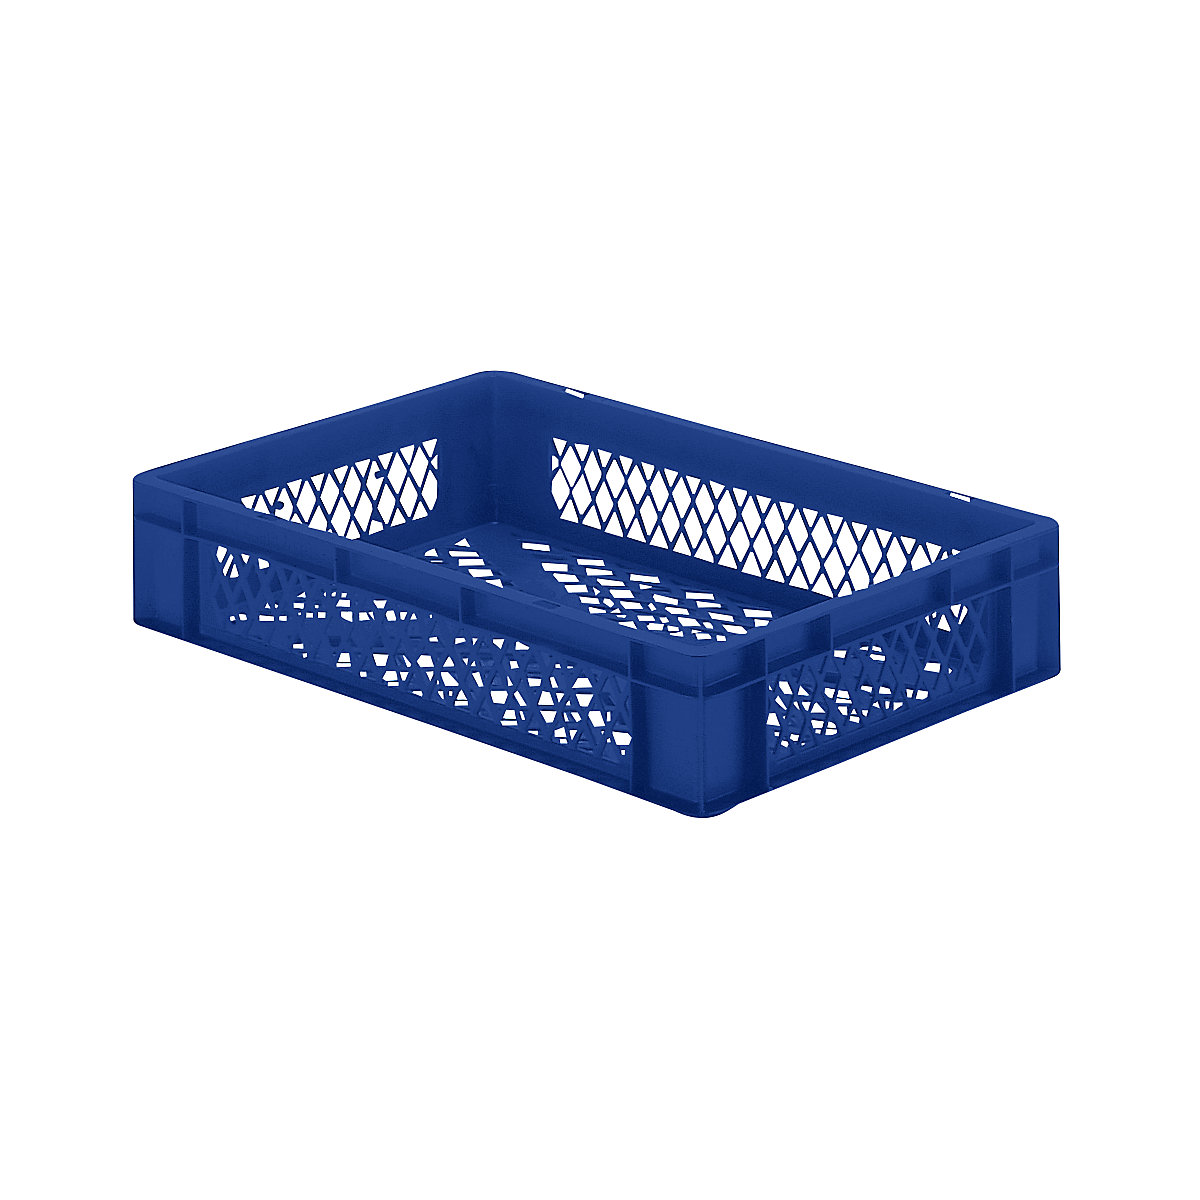 Euro stacking container, perforated walls and base, LxWxH 600 x 400 x 120 mm, blue, pack of 5